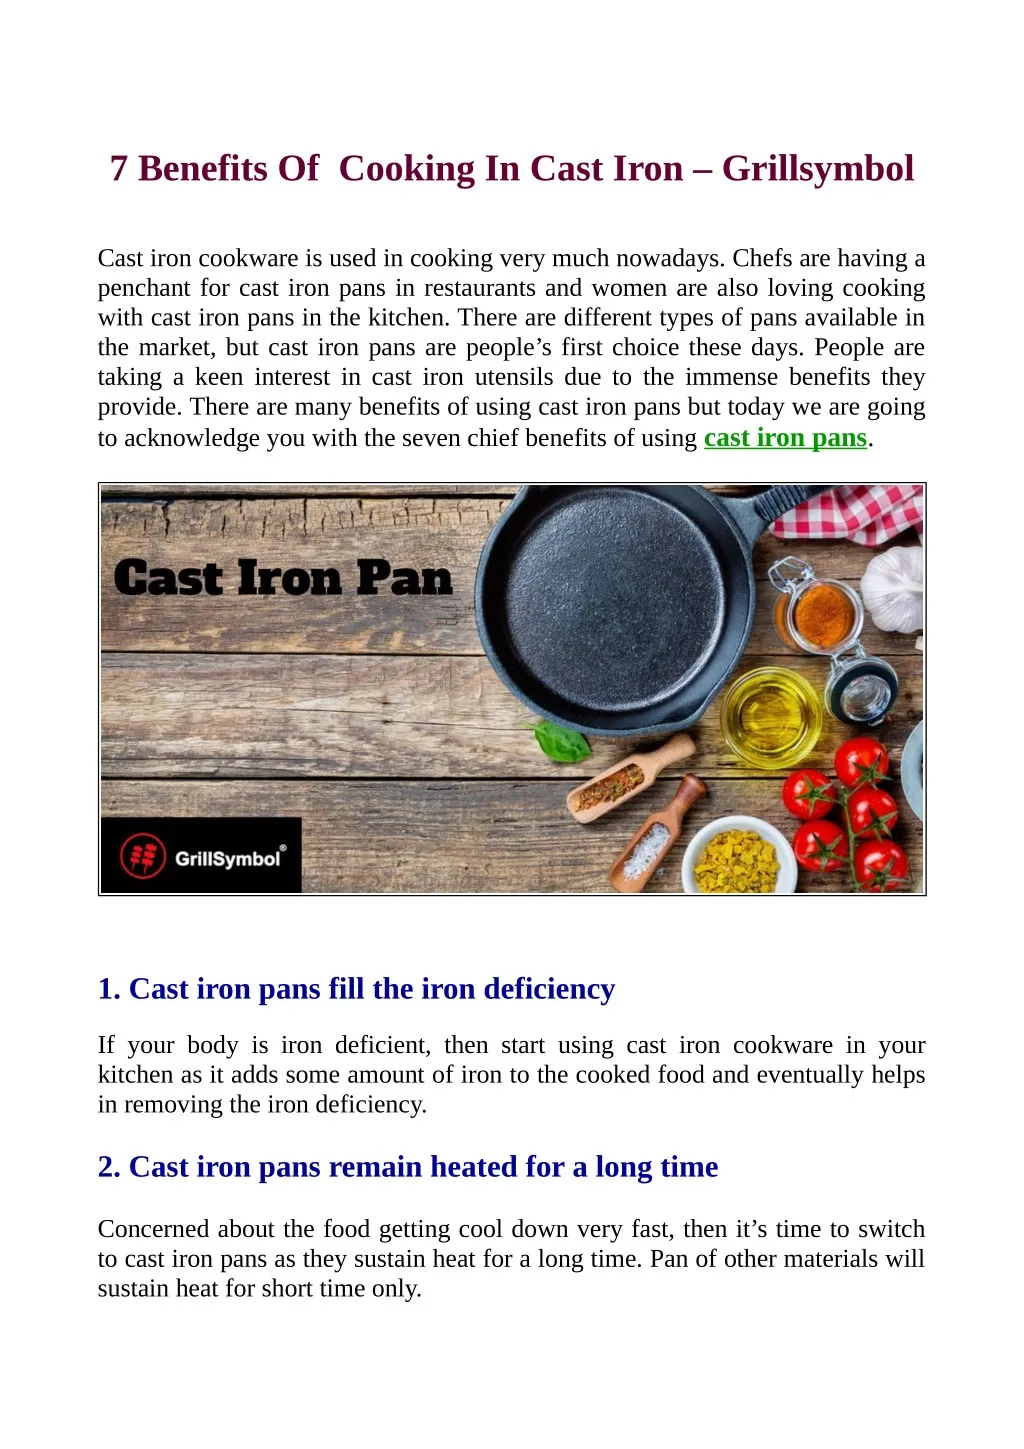 7 benefits of cooking in cast iron grillsymbol